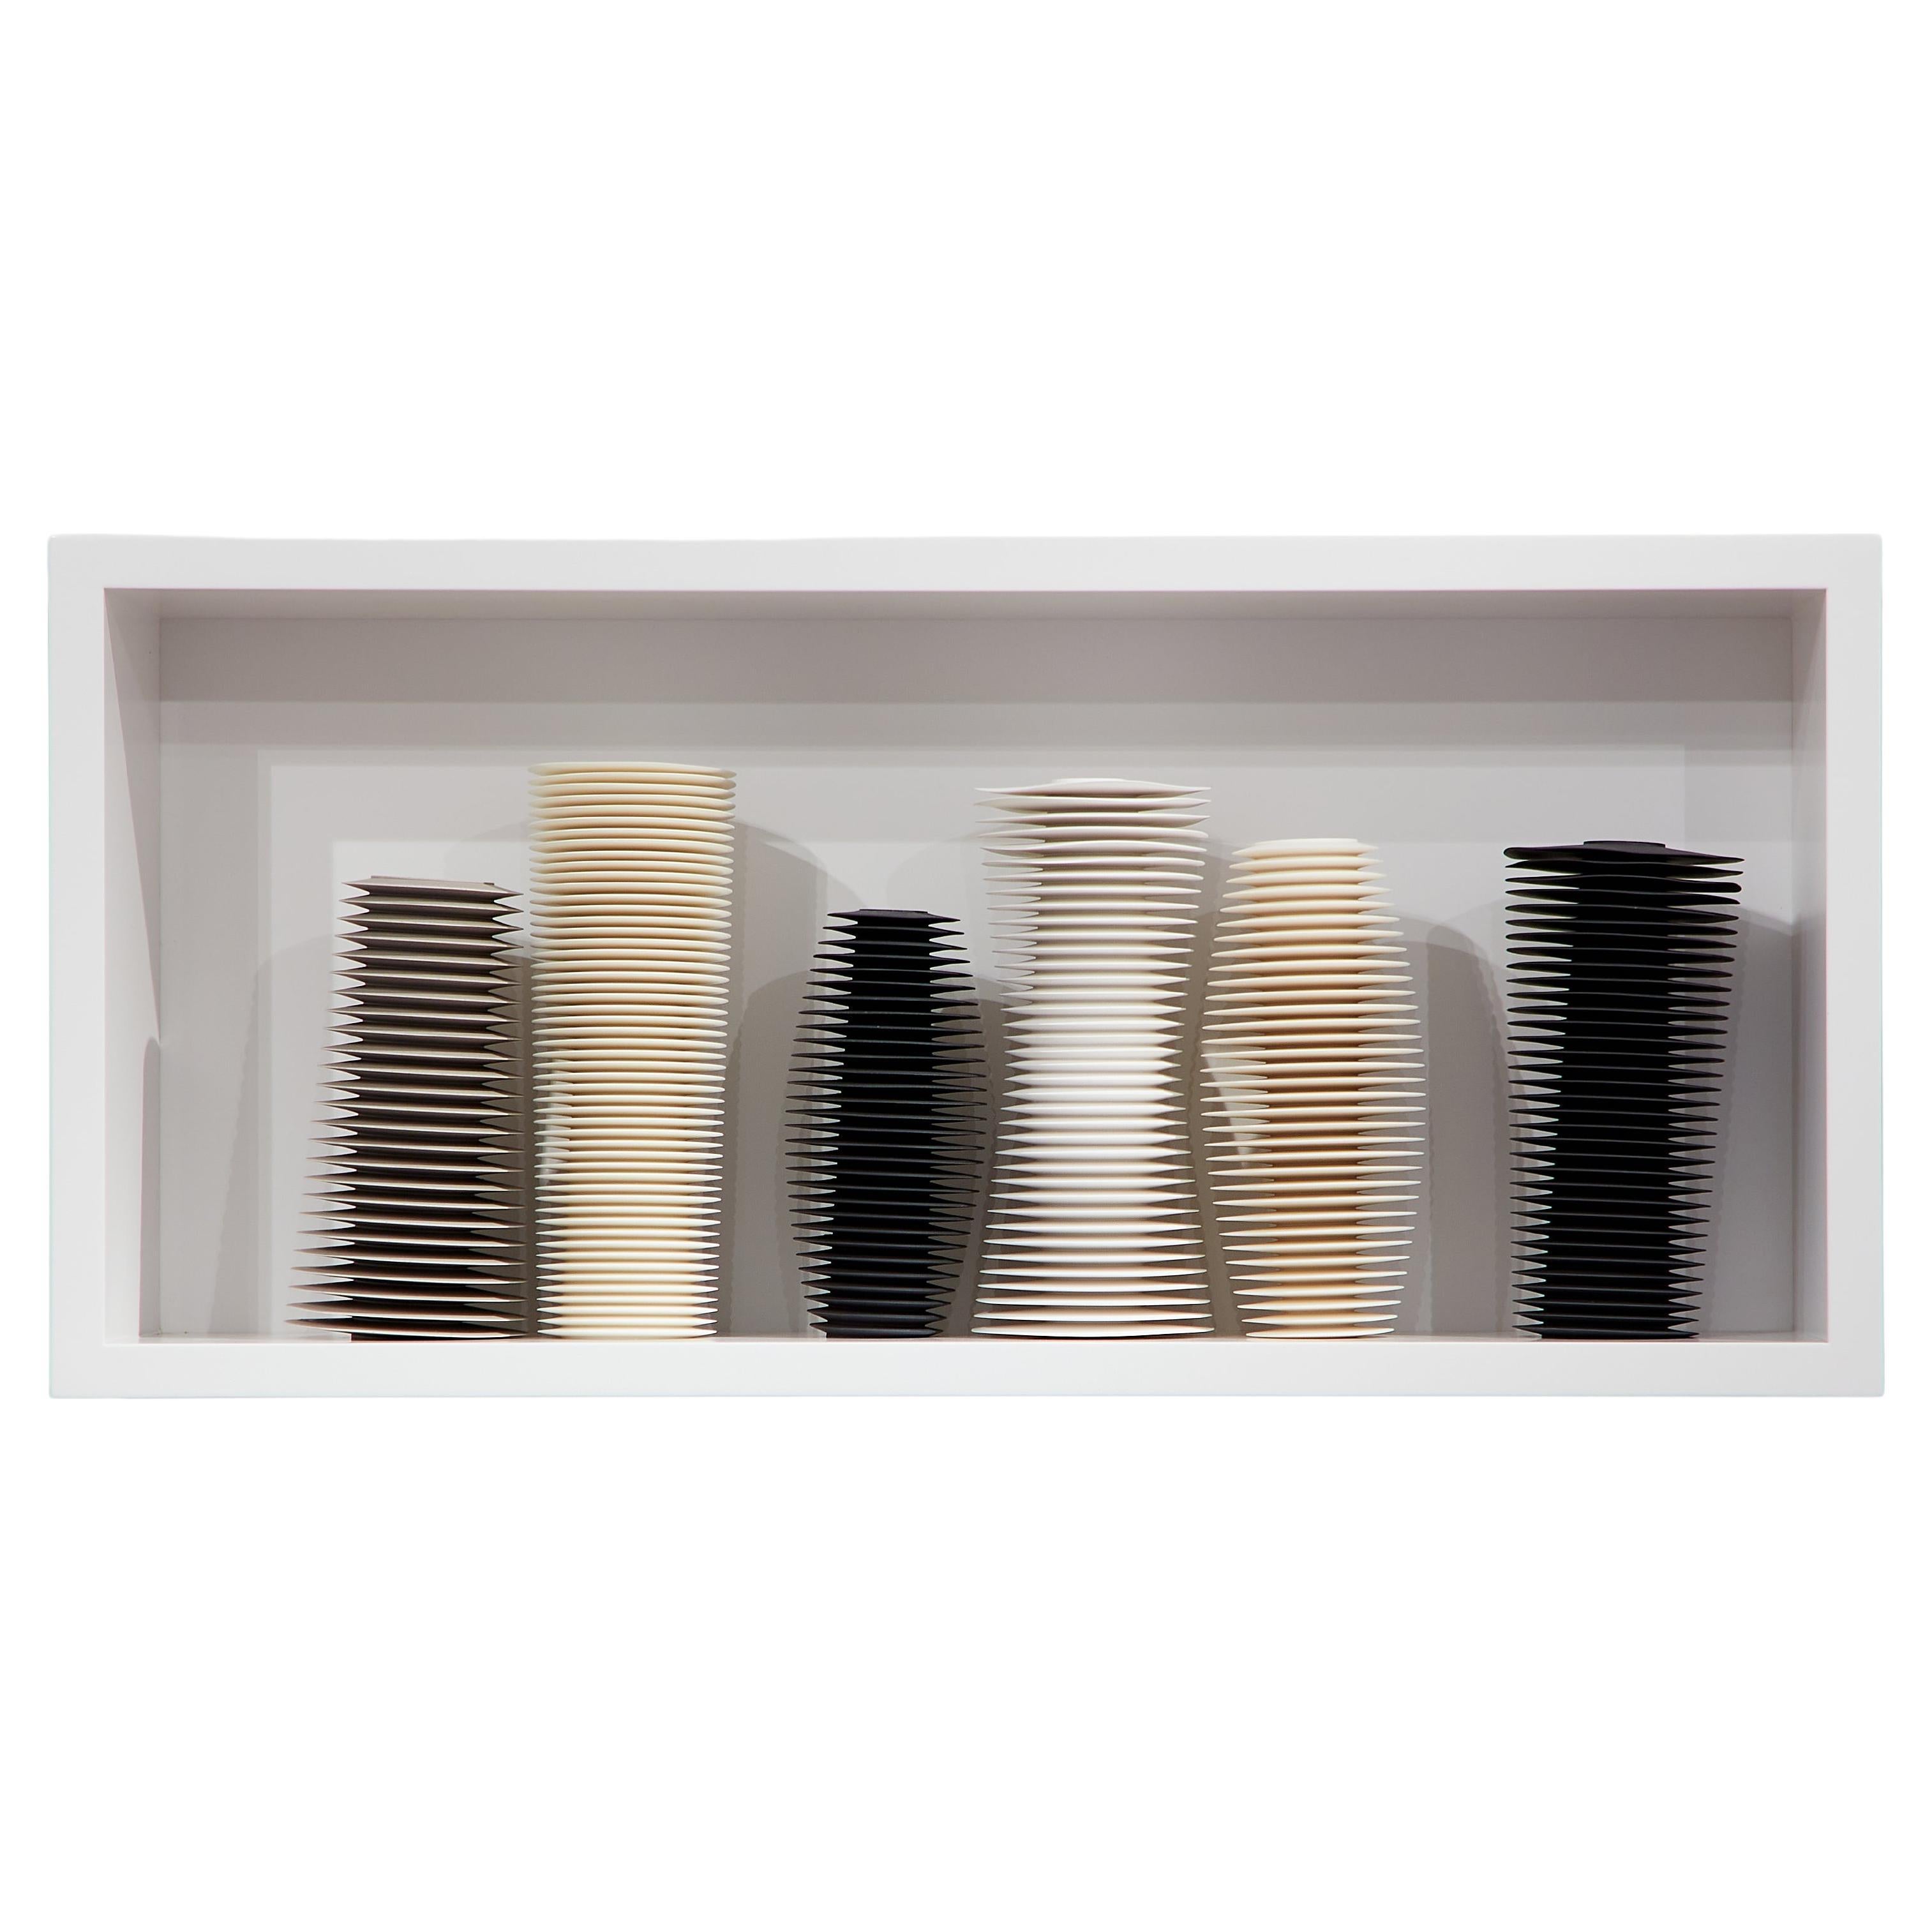 Installation 21.18, Six Piece Framed Ceramic Sculpture by Nicholas Lees For Sale